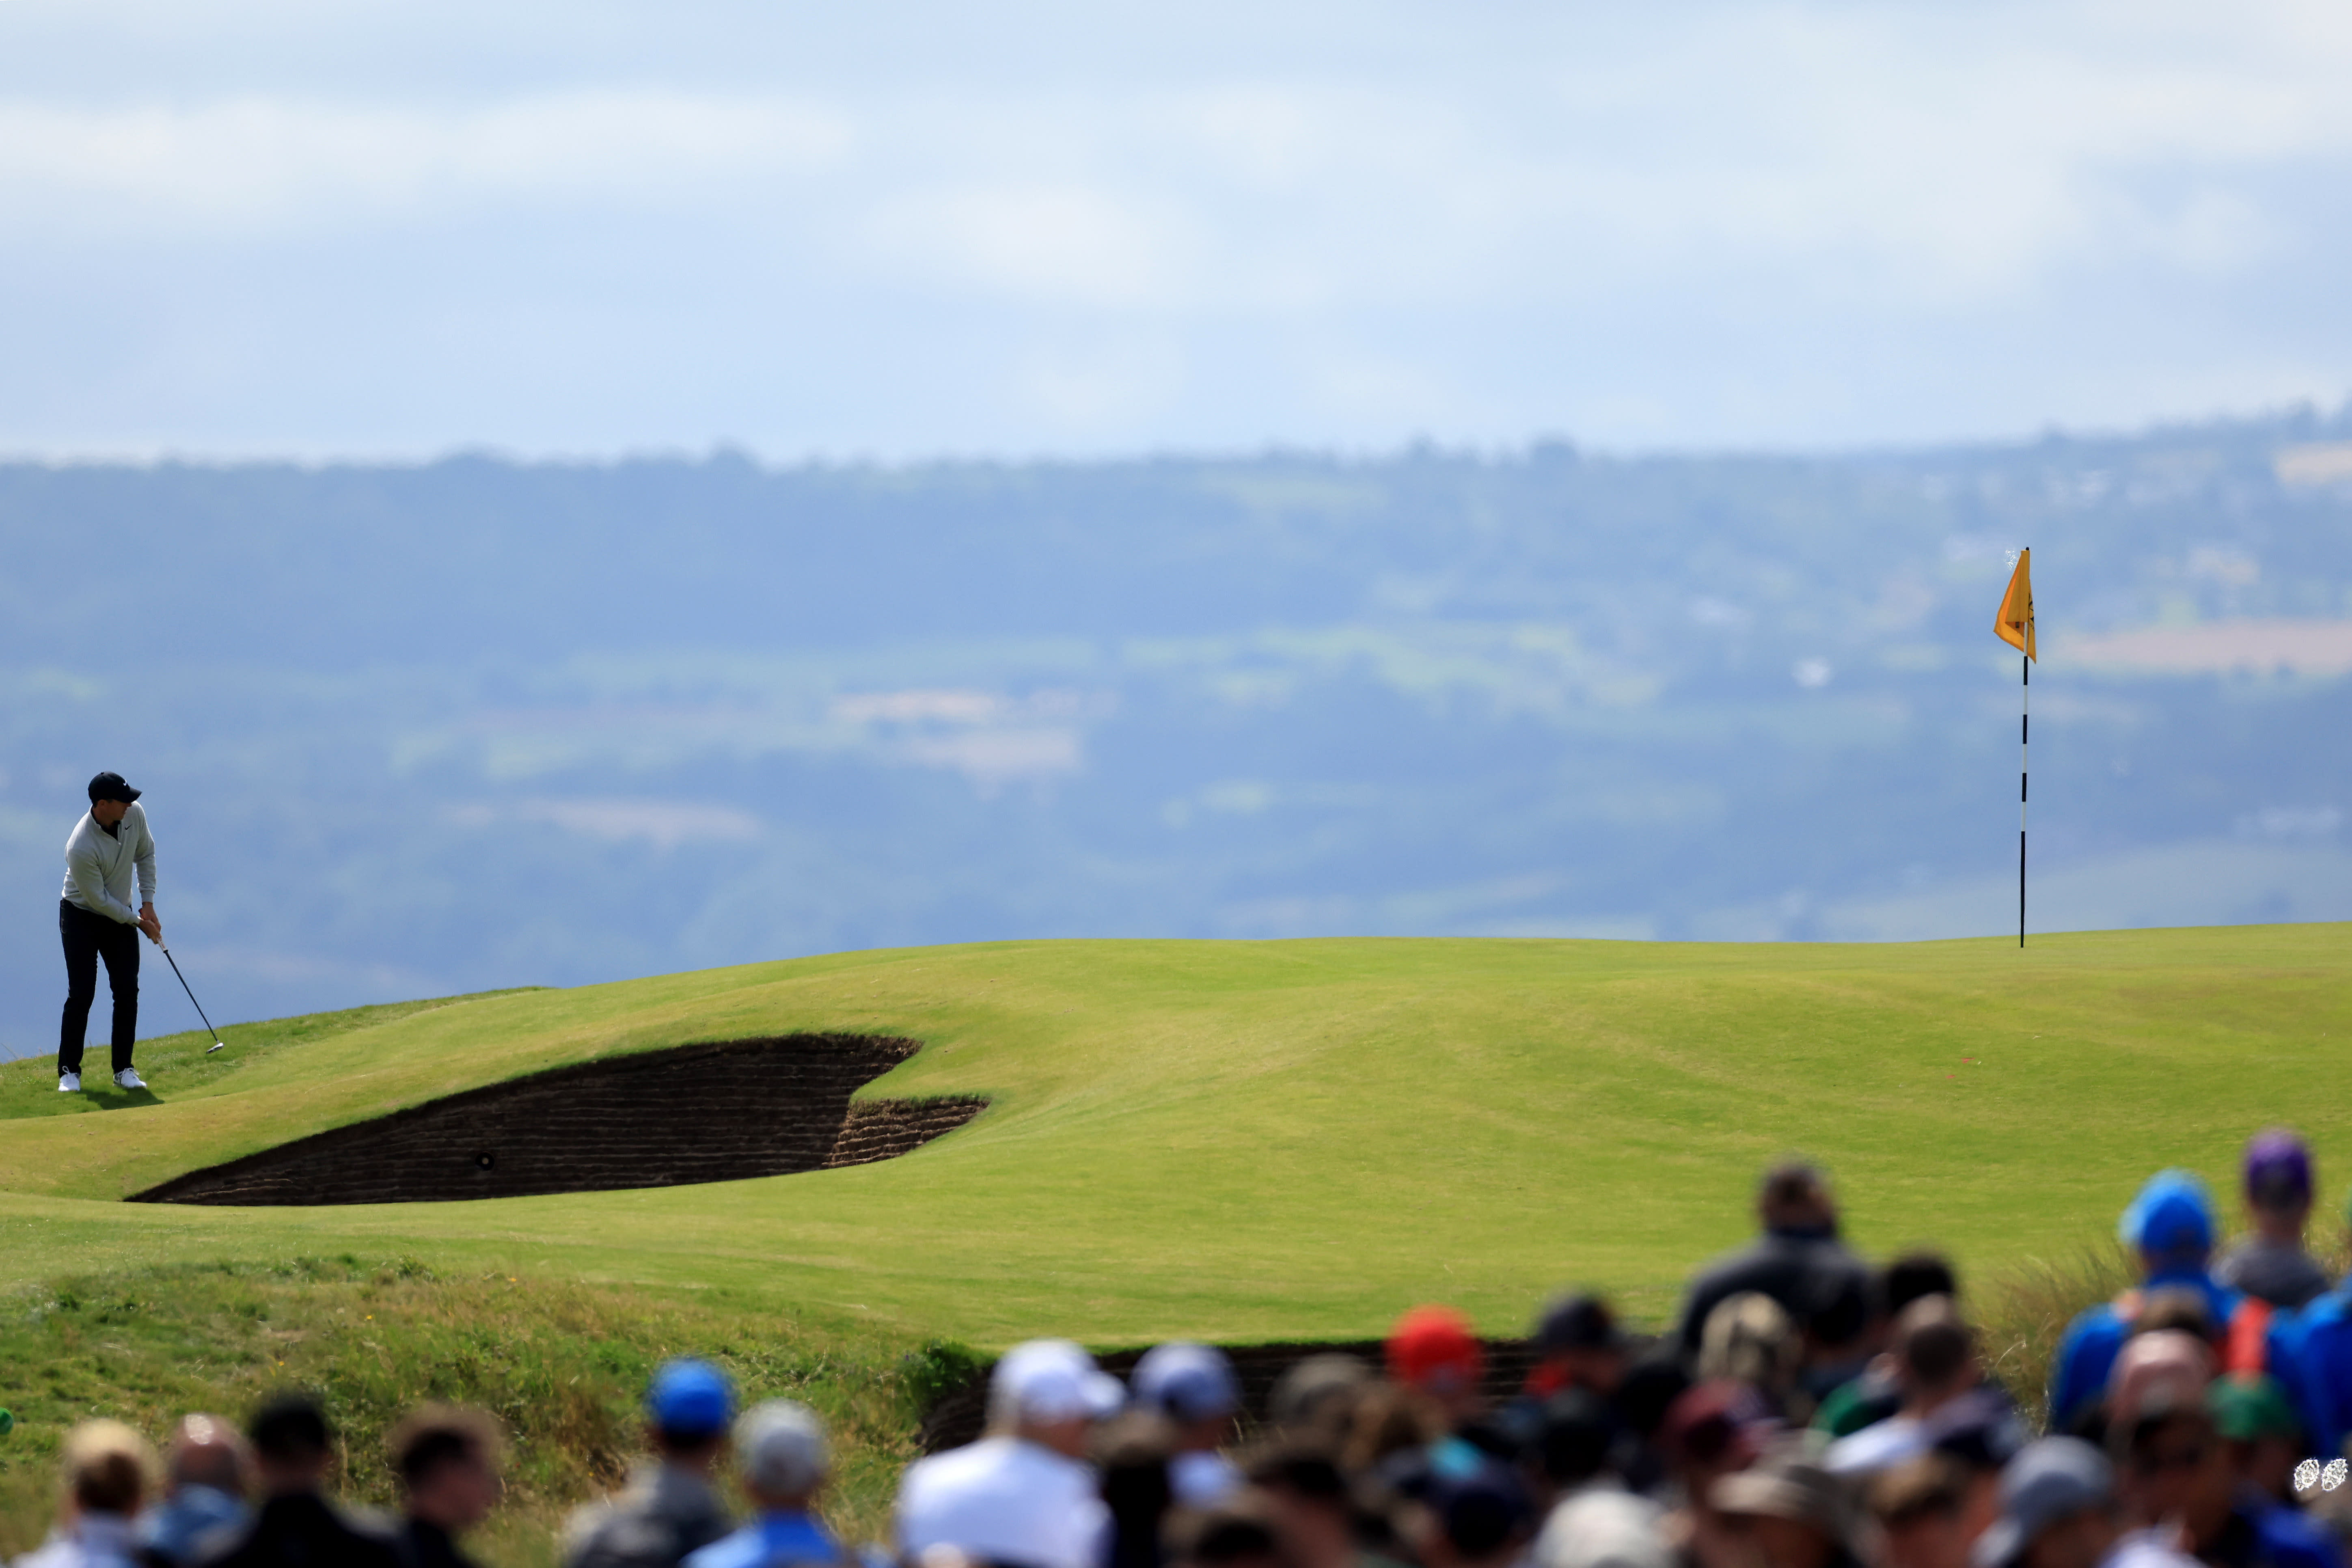 How to Watch The Open Championship, Round 3 Featured Groups, live scores, tee times, TV times